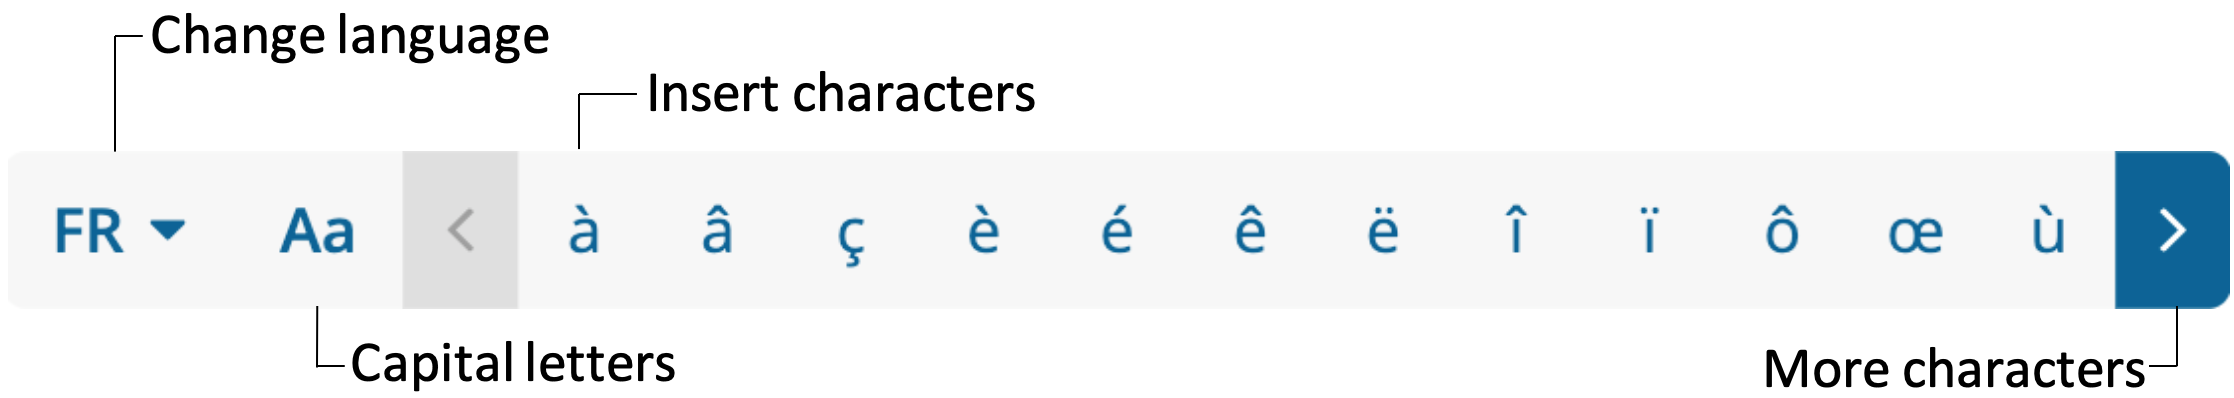 The special character toolbar includes accented letters and other characters. You can change the language and switch to capital letters.